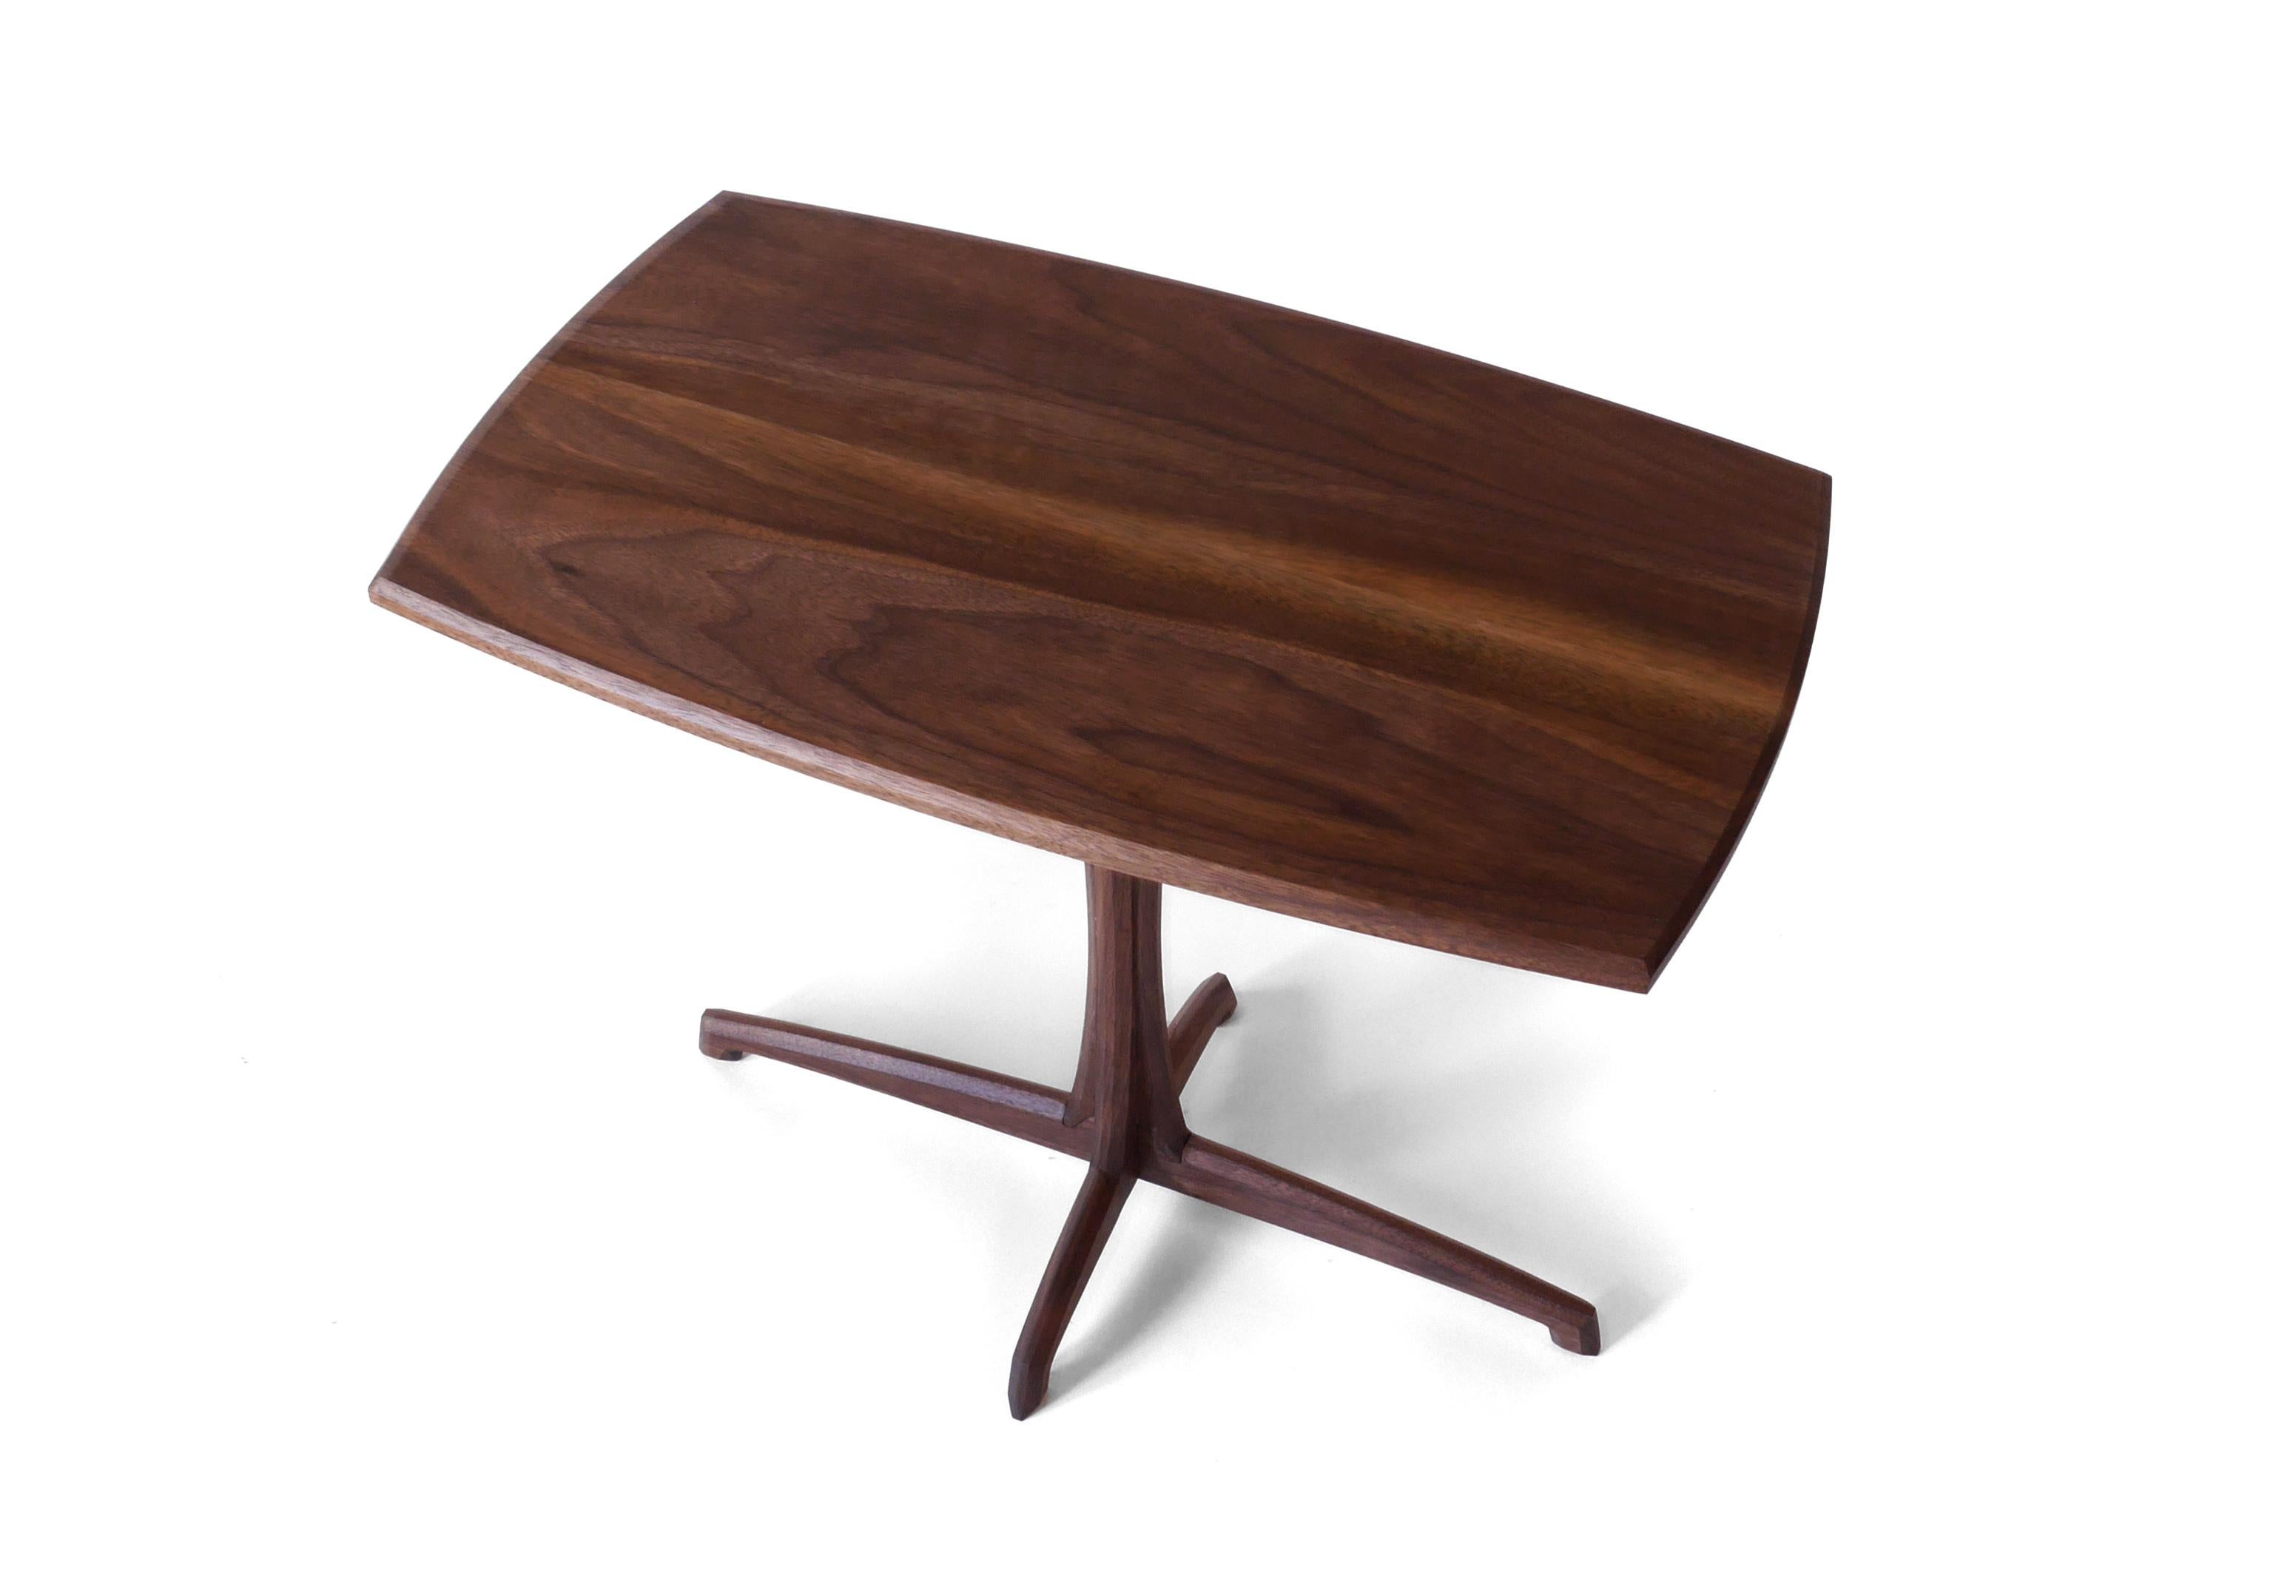 American Walnut Plume Side Table, Contemporary Handmade Pedestal End Table by Arid For Sale